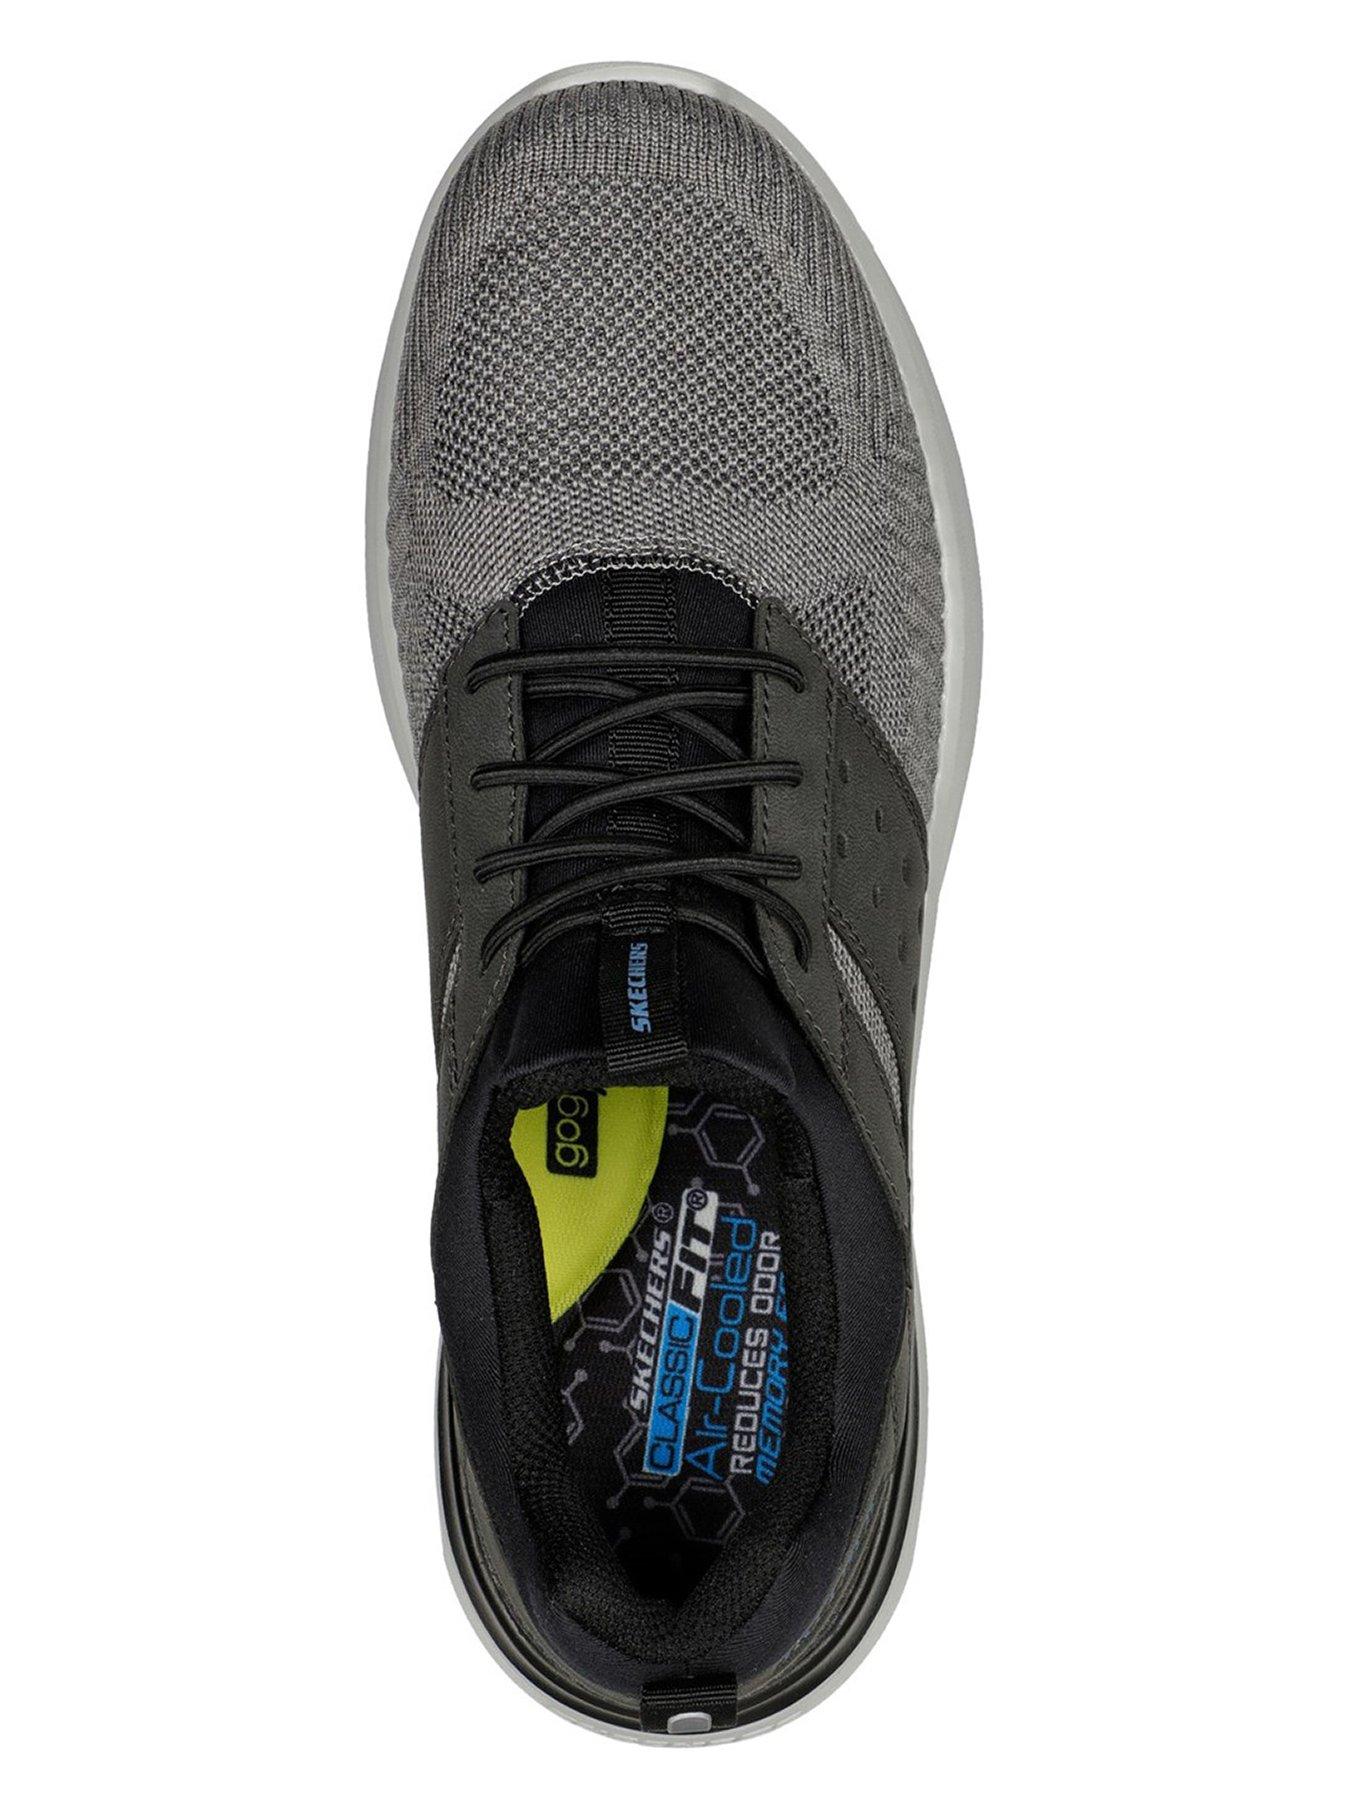 Skechers Air-cooled Goga Mat Arch Trainer - Grey